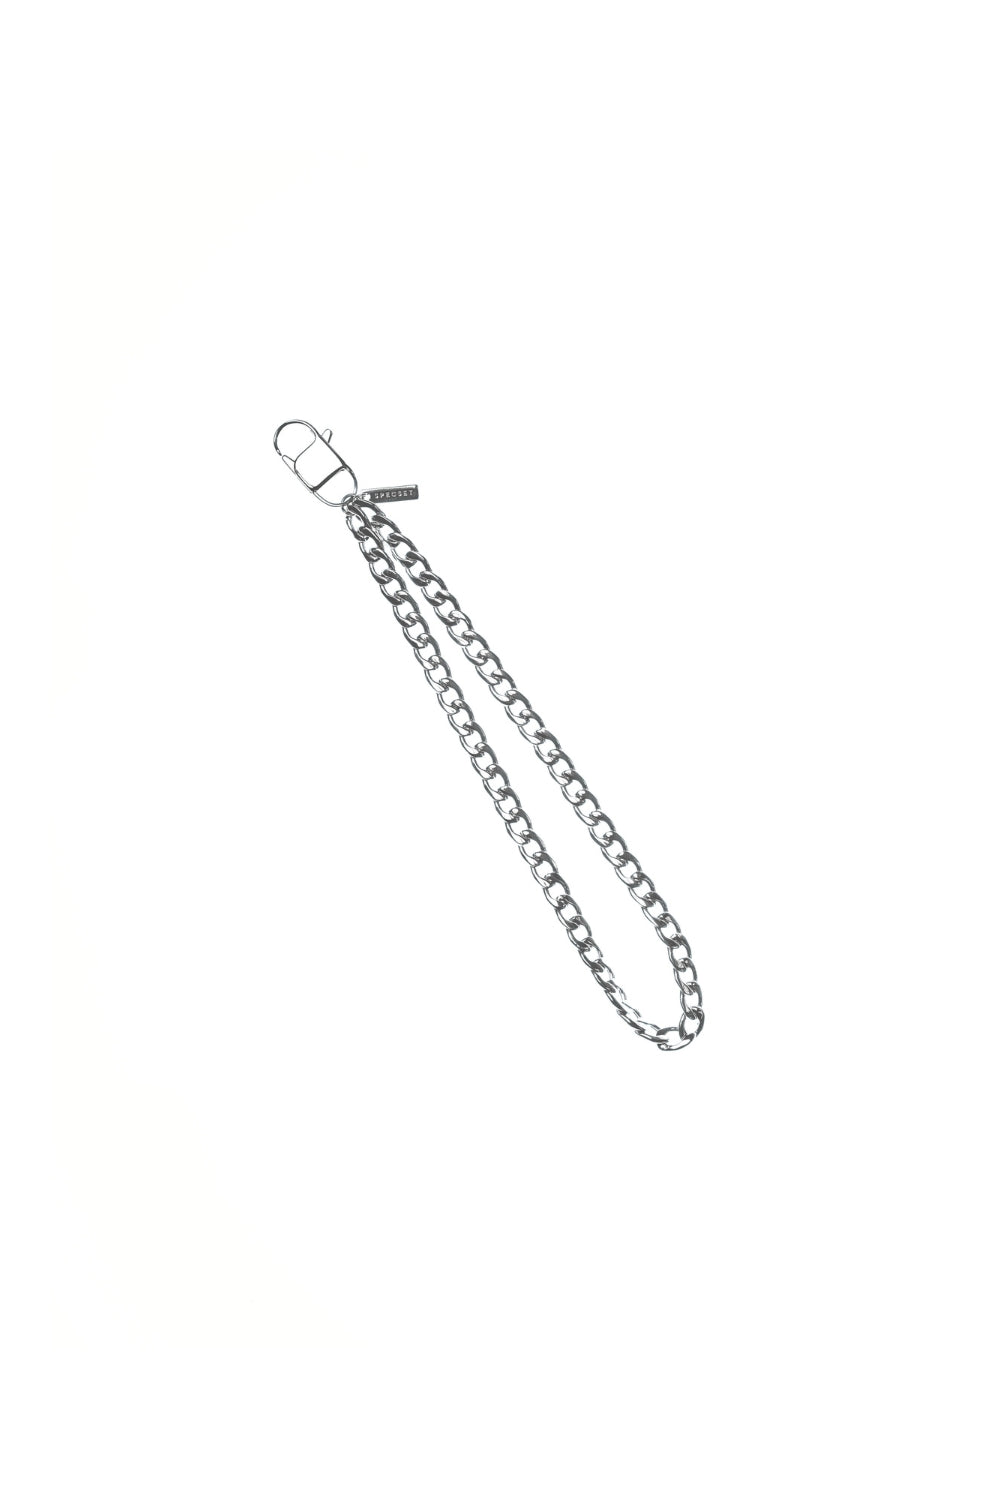 CURBY - SILVER Wrist Phone Chain | SPECSET